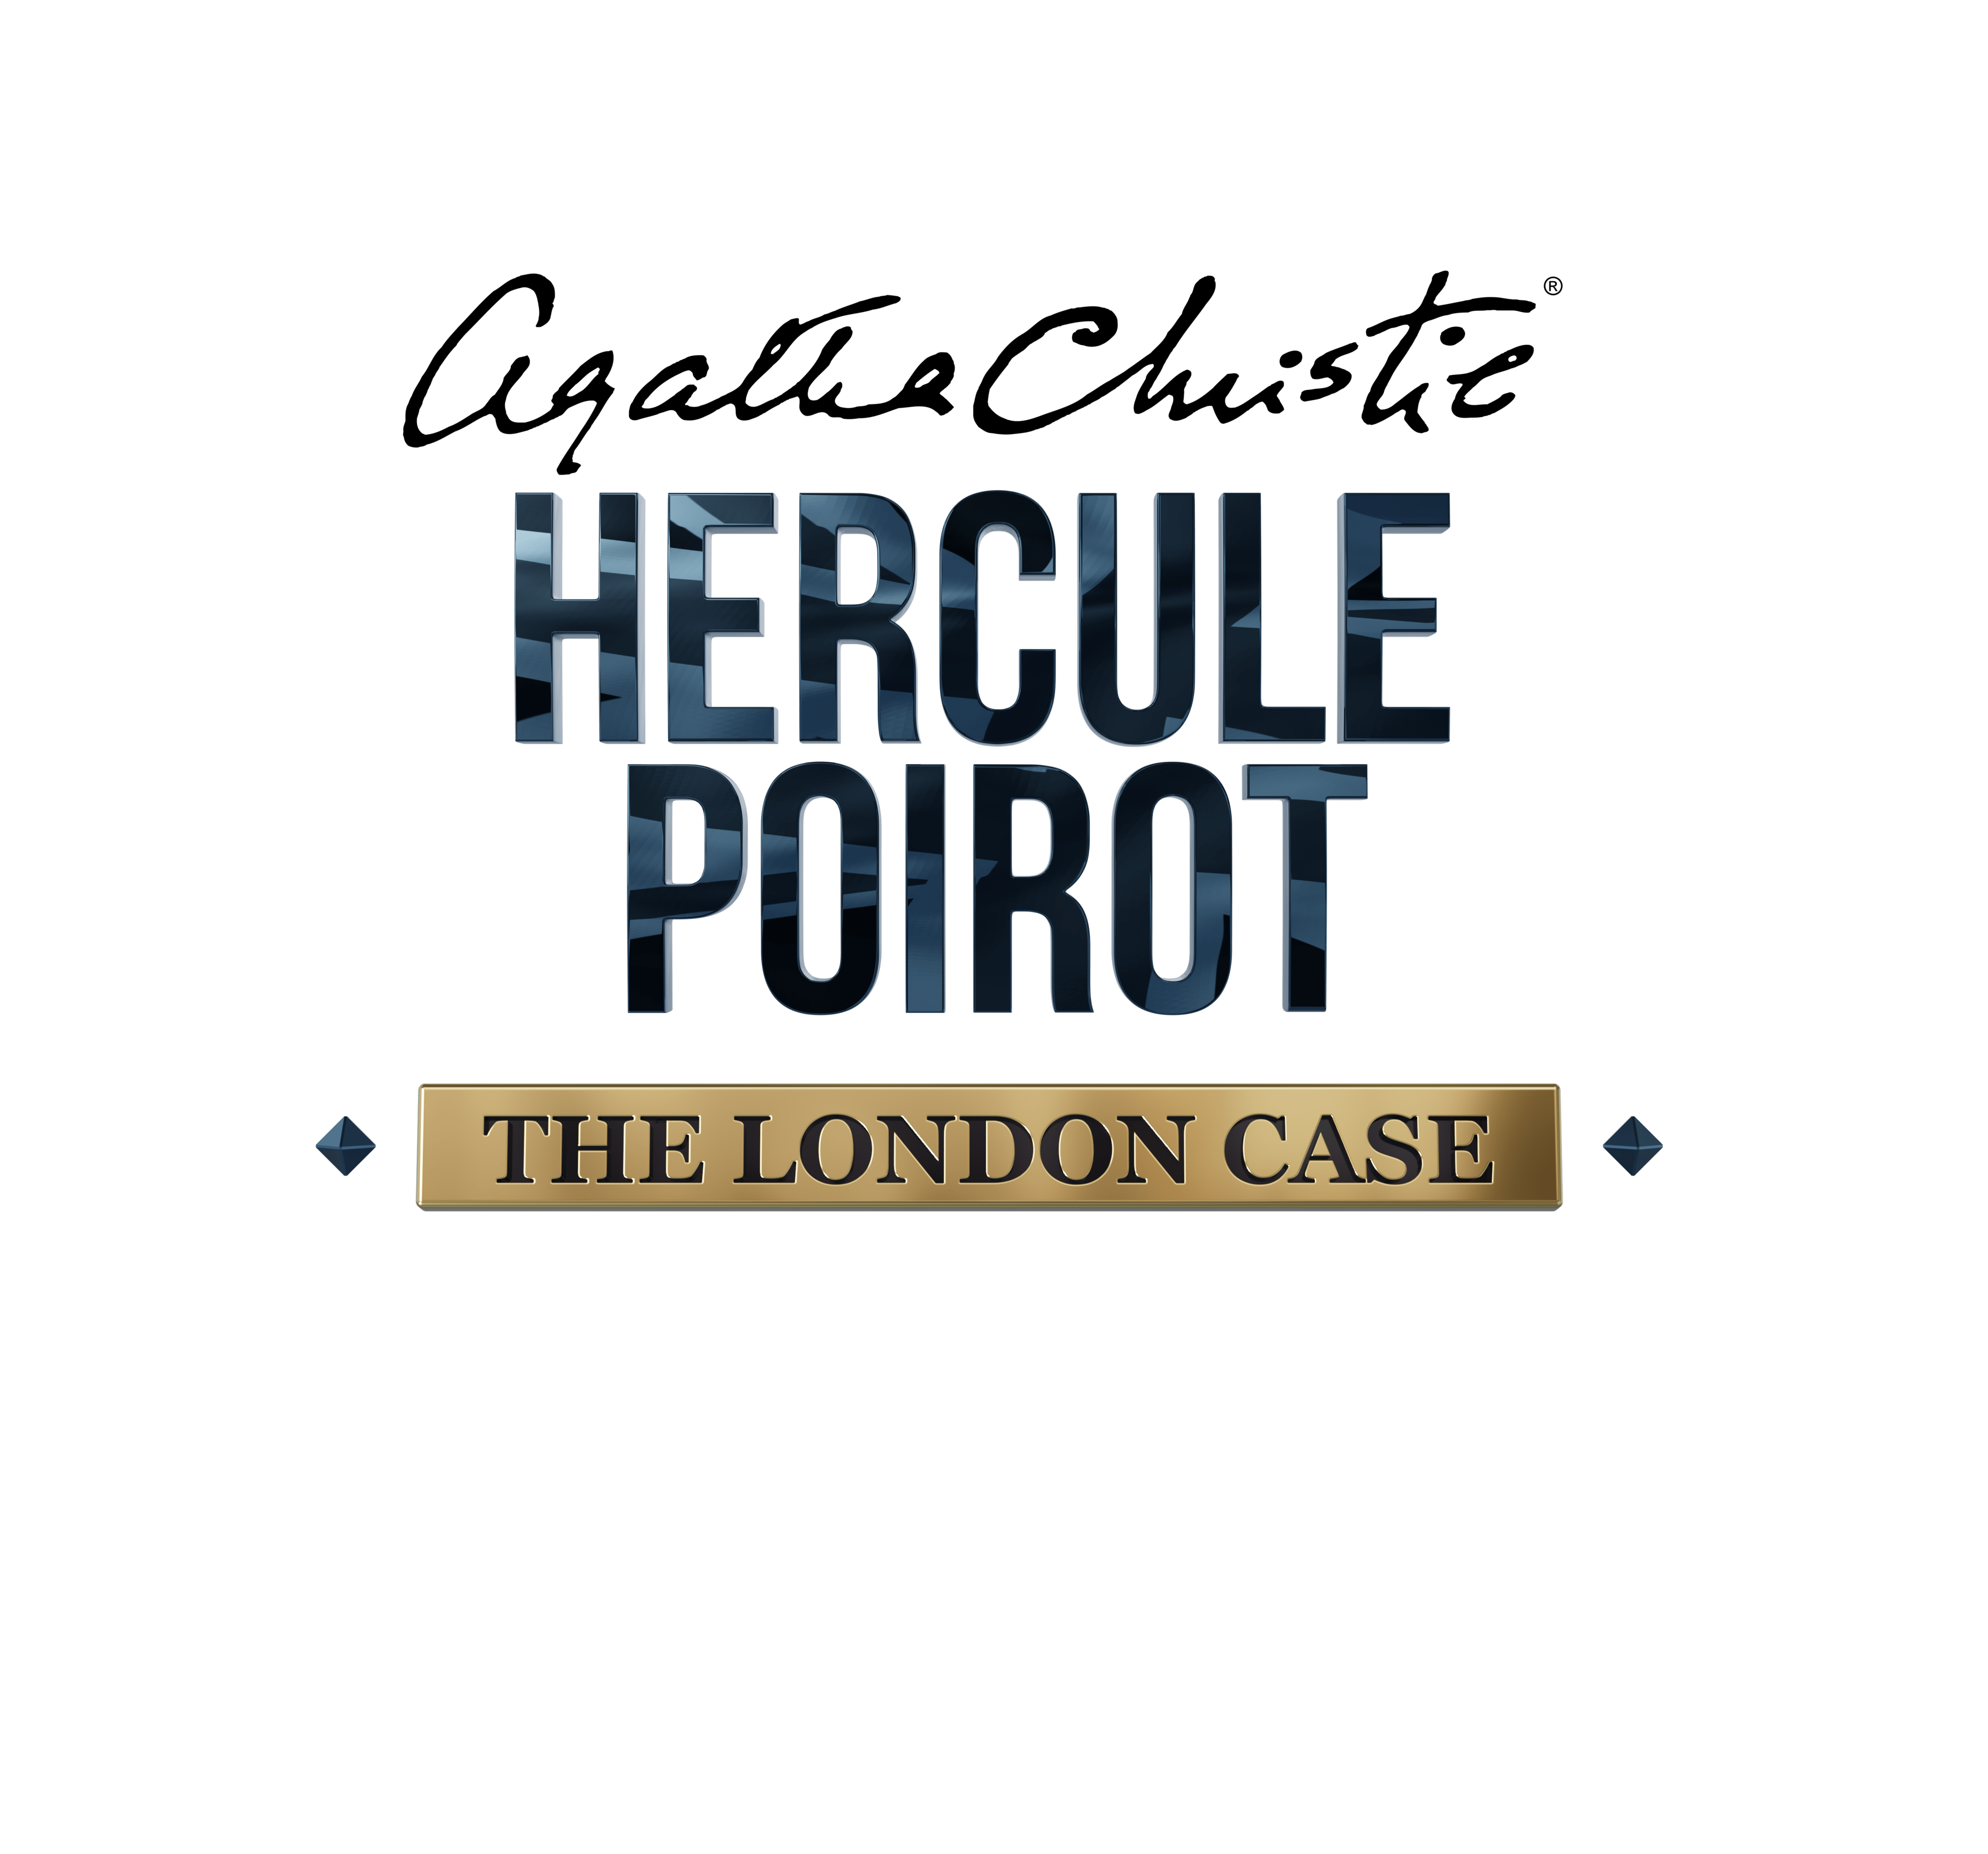 Agatha Christie Switch, PS5, One, and Gematsu Hercule Poirot: for - PS4, - Case London The Xbox Xbox PC Series, announced